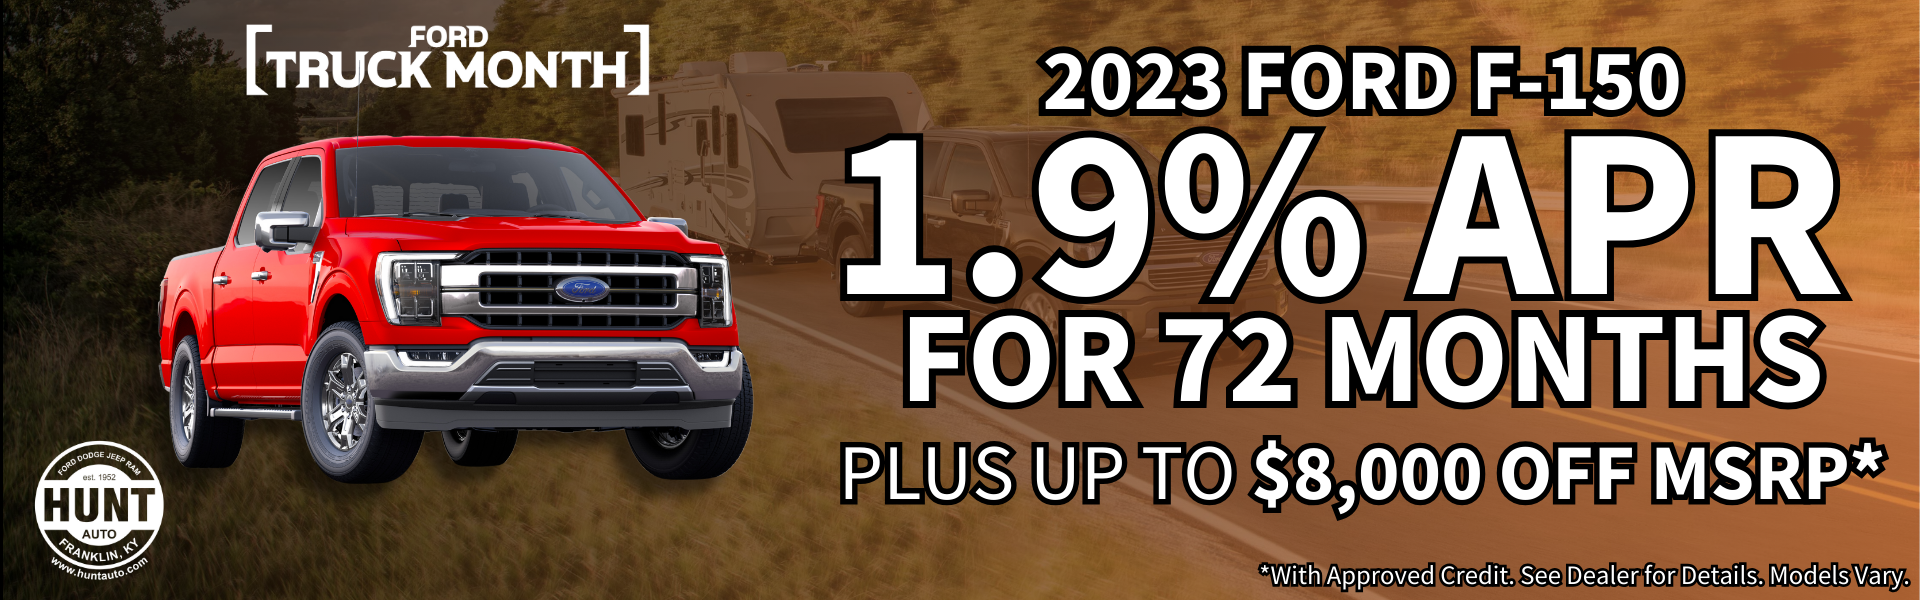 Save more on a 2023 Ford F-150 with 1.9%APR for 72 Months!